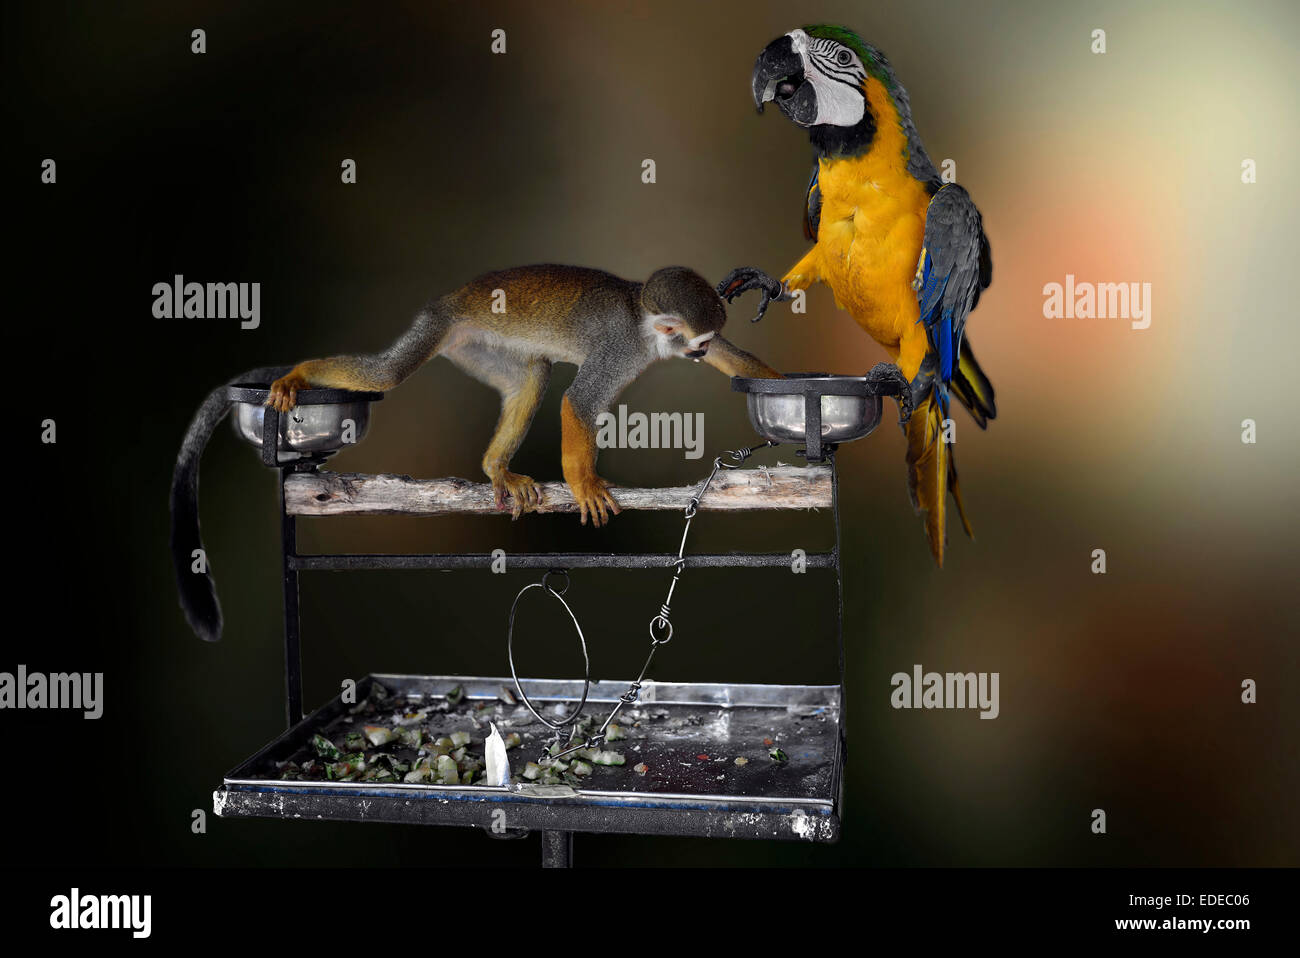 Mischievous animal. Monkey stealing food from a startled Macaw. Funny animals. A set of three sequences Stock Photo